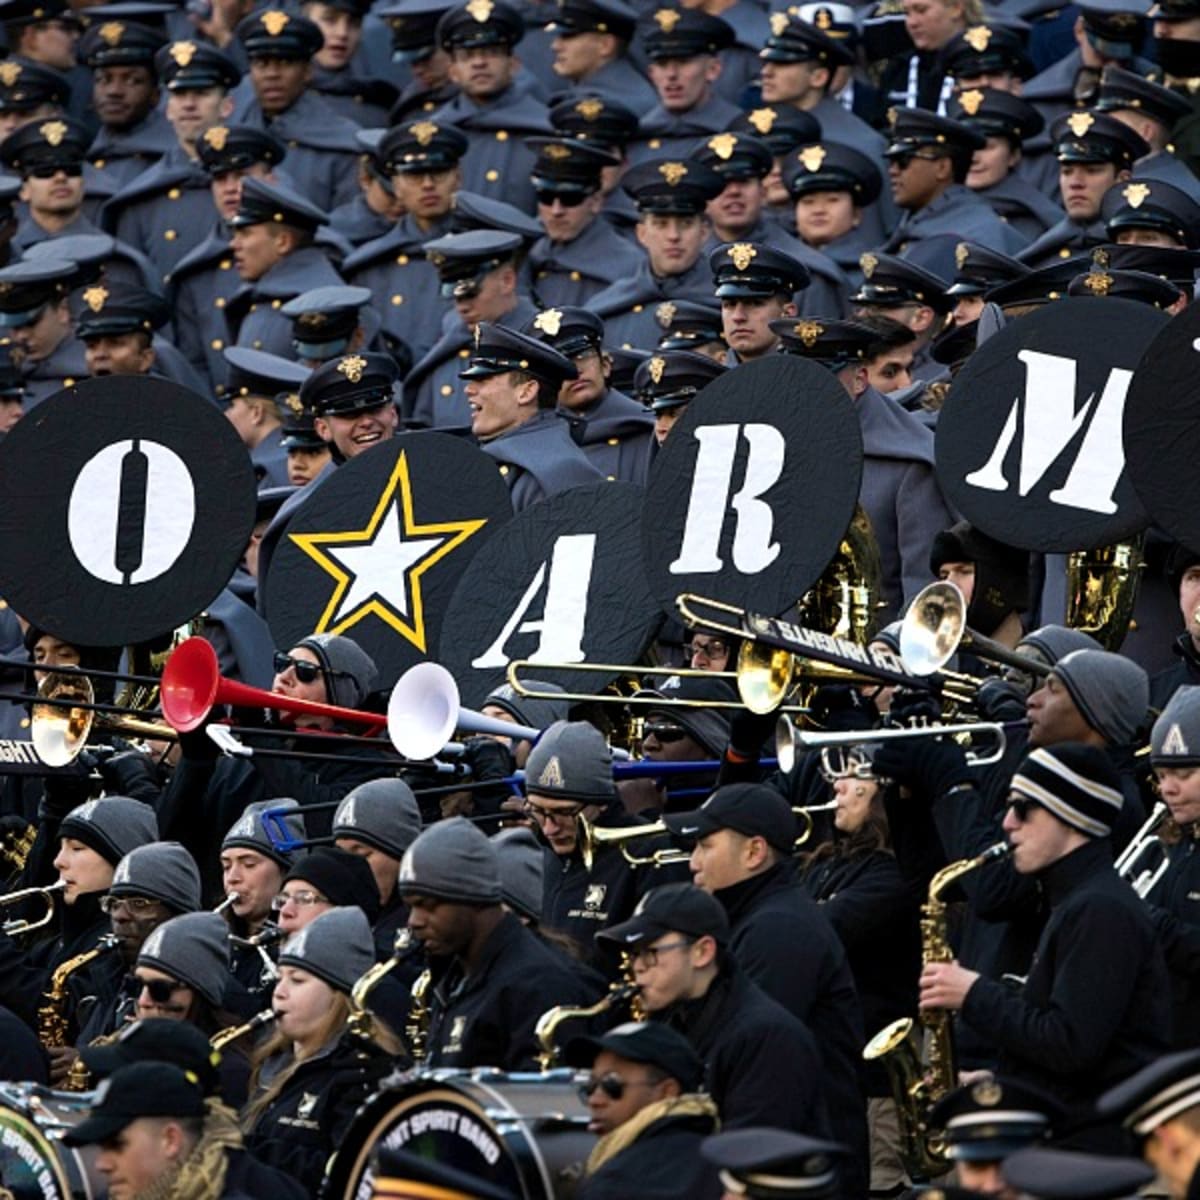 Army-Navy Game 2021, Keys to the Game And Key Matchups